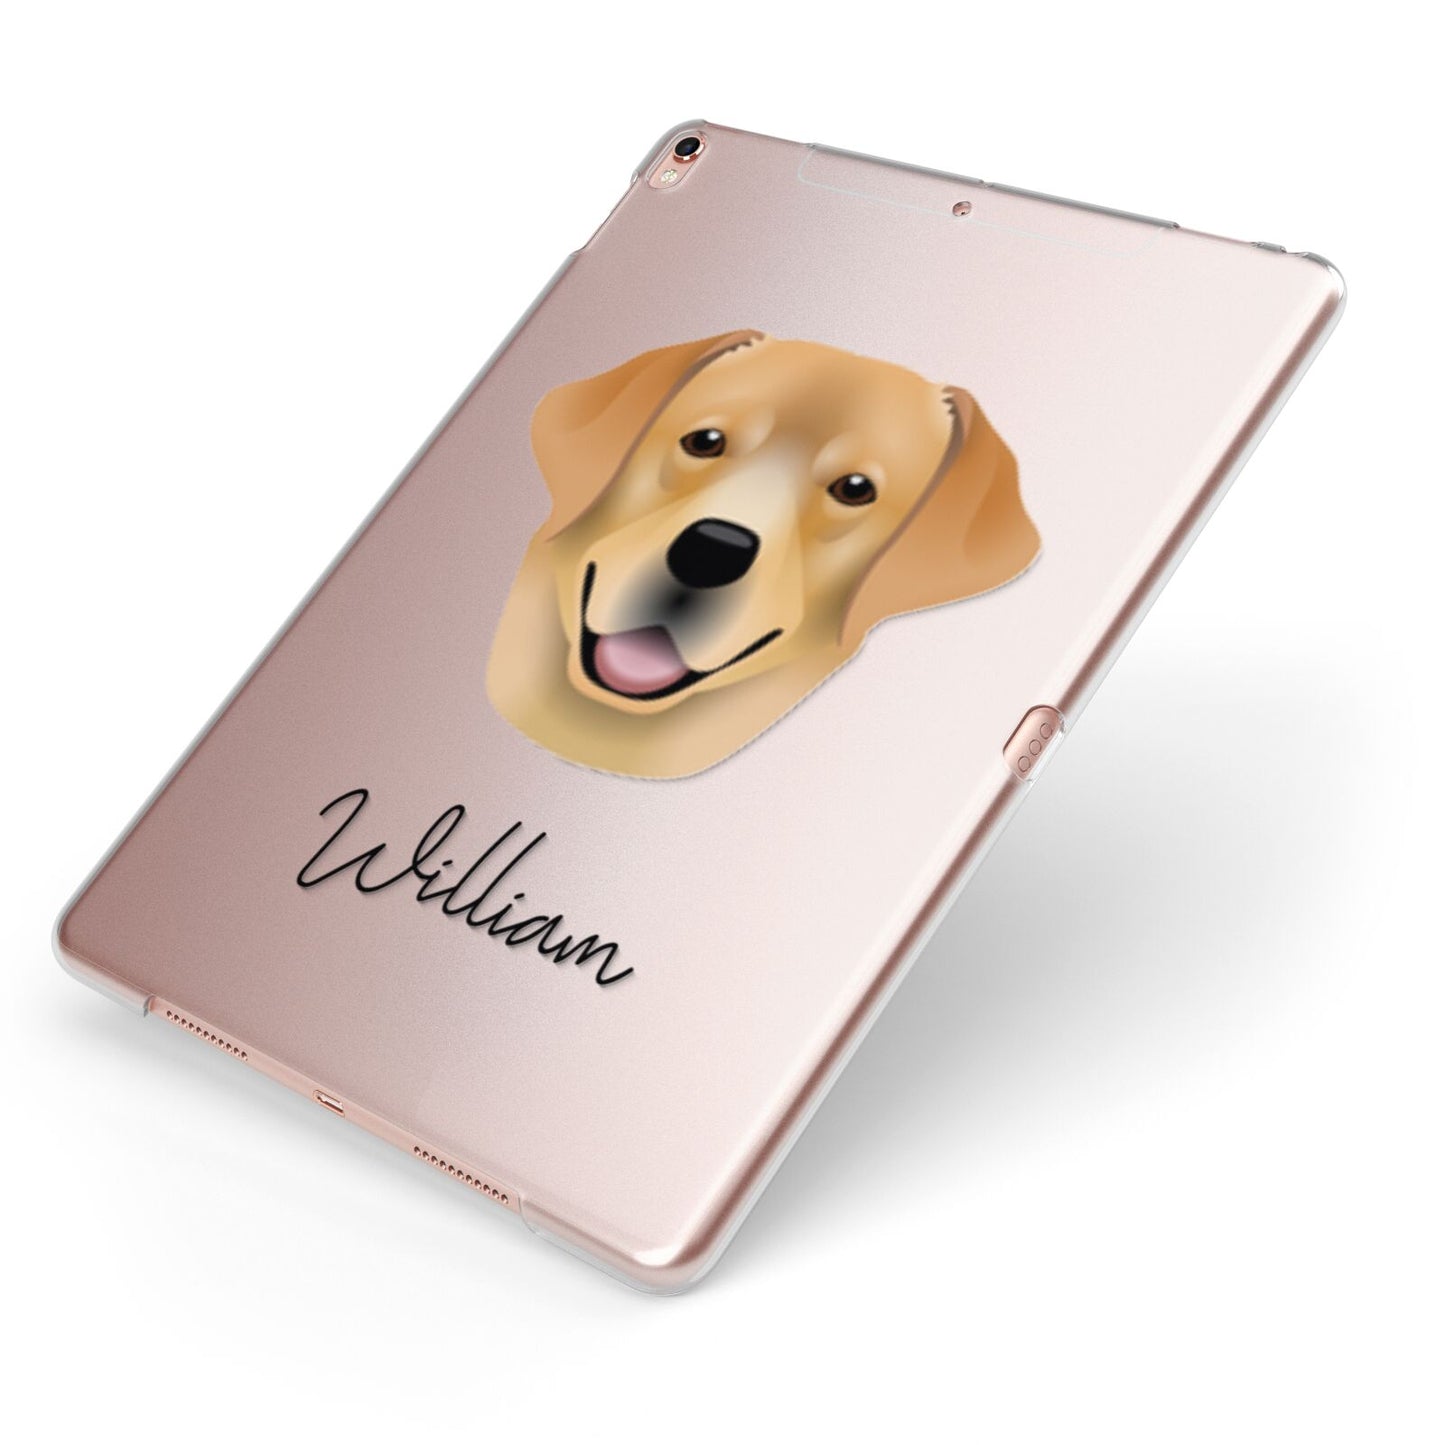 Labrador Retriever Personalised Apple iPad Case on Rose Gold iPad Side View